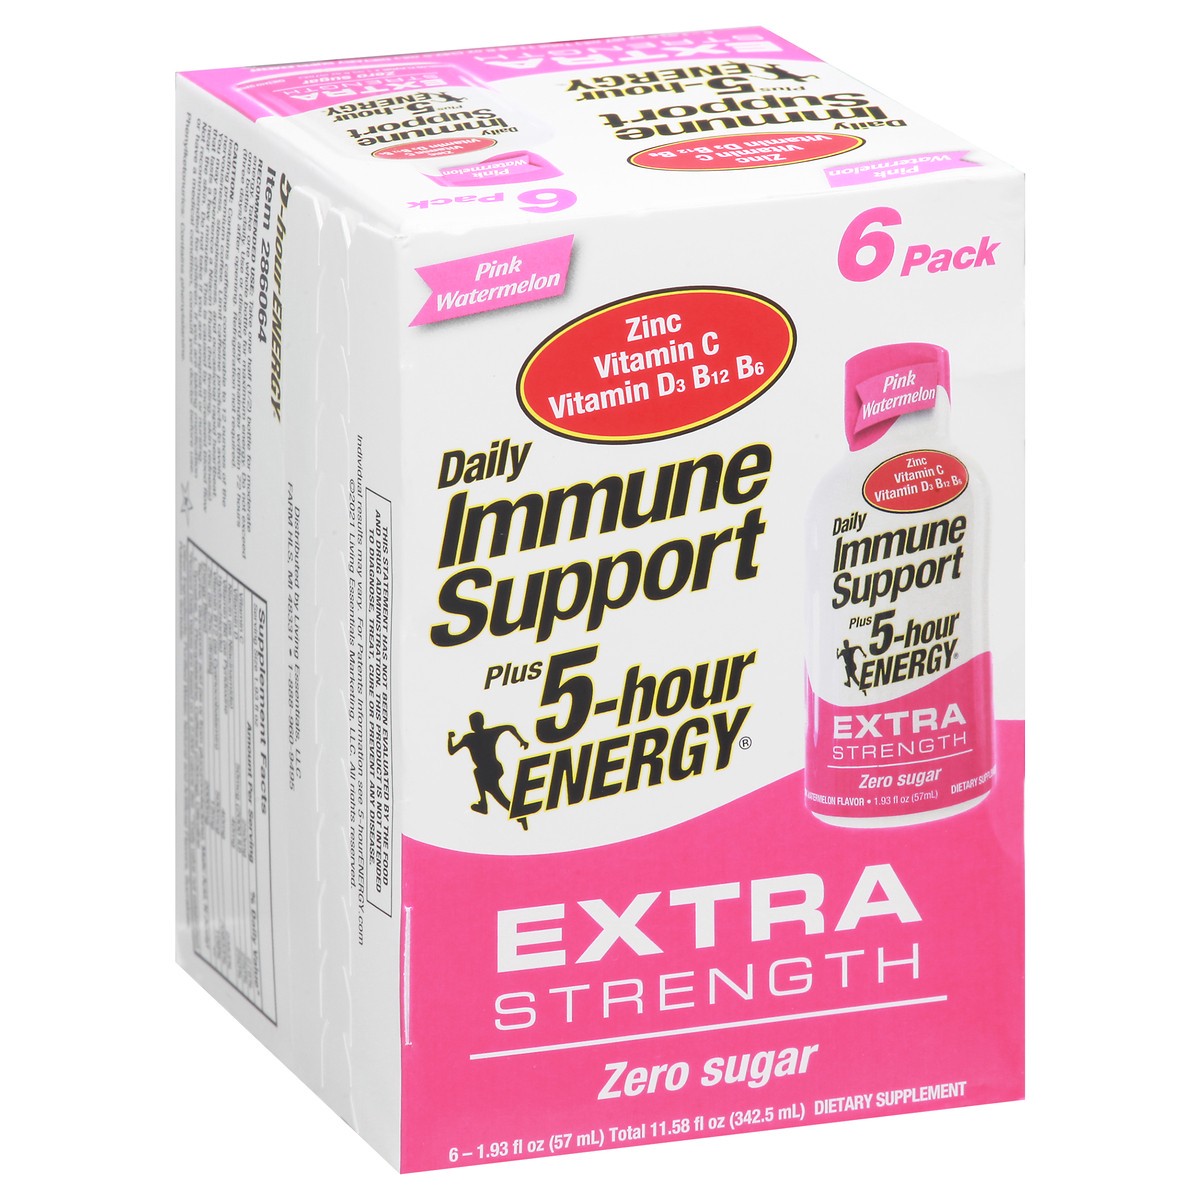 slide 14 of 14, 5-Hour Energy 6 Pack Extra Strength Pink Watermelon Daily Immune Support 6 1.93 fl oz 6 ea Box, 1.93 oz